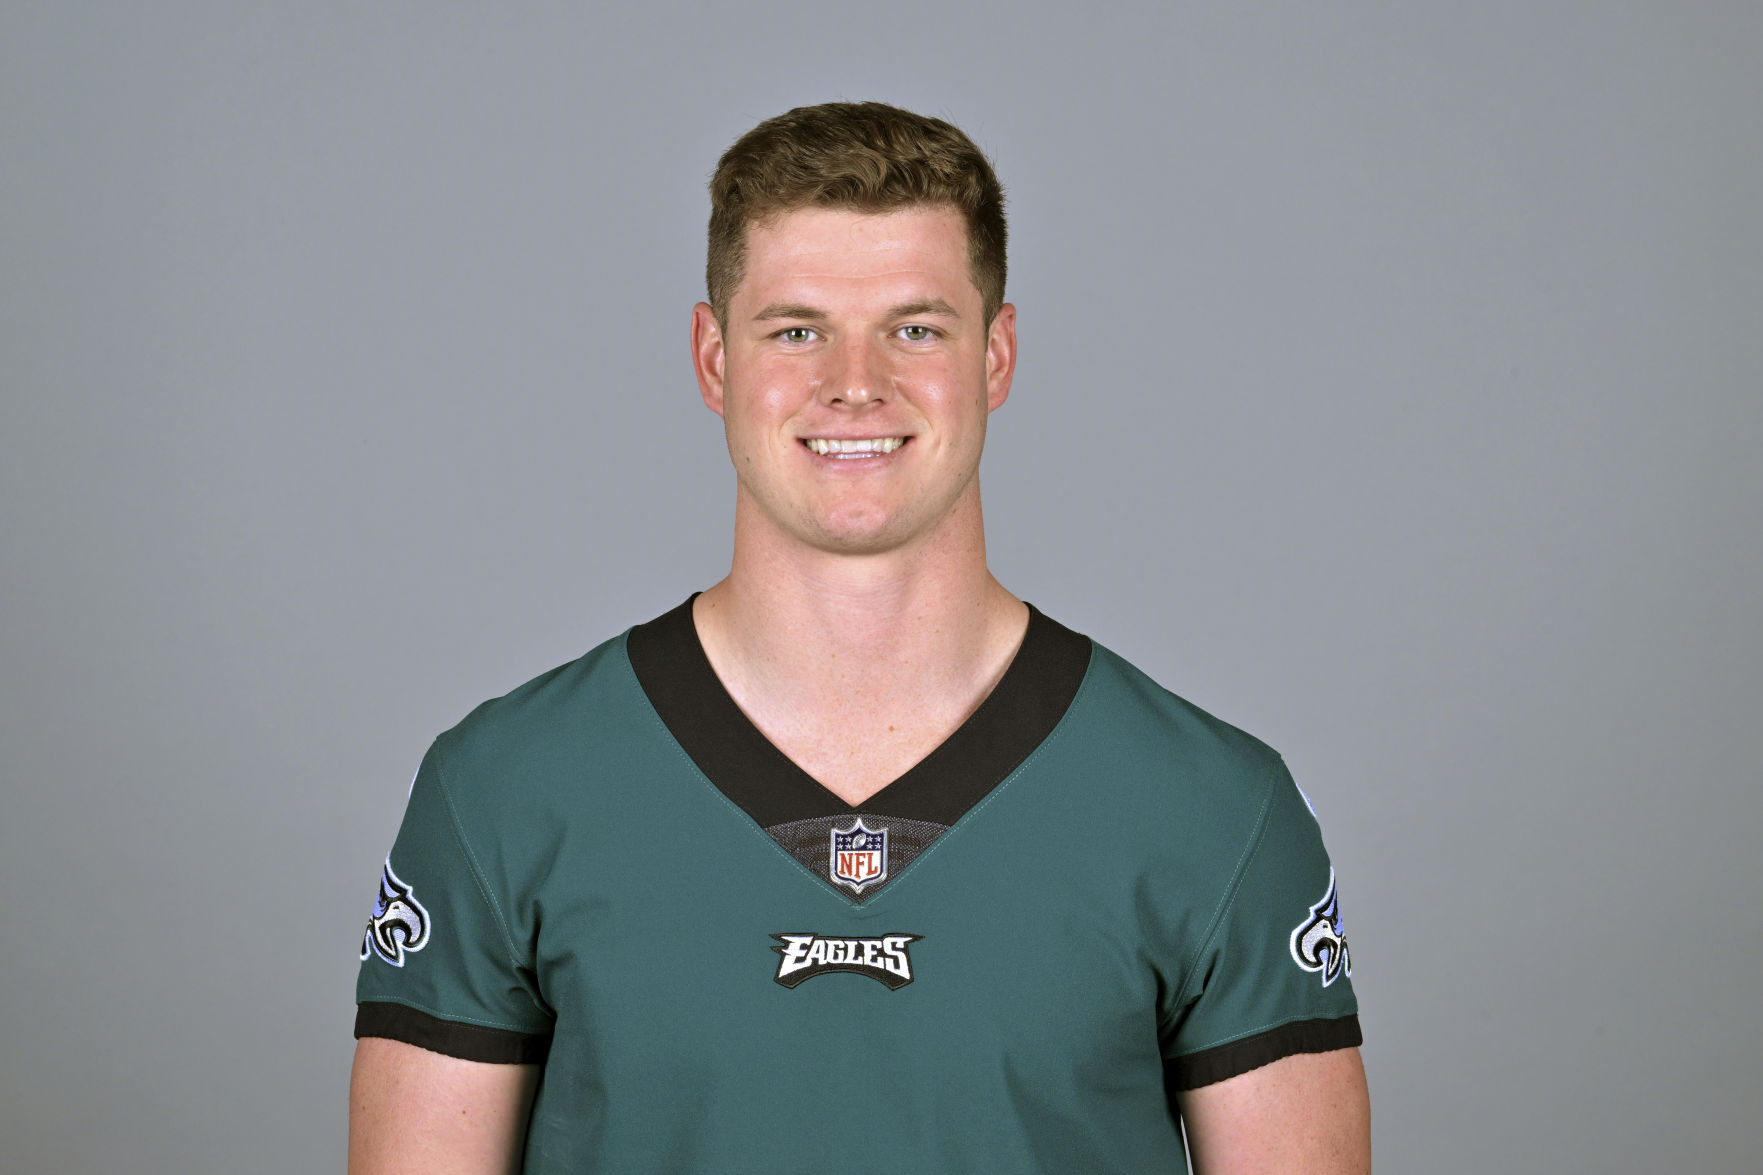 Eagles safety jersey